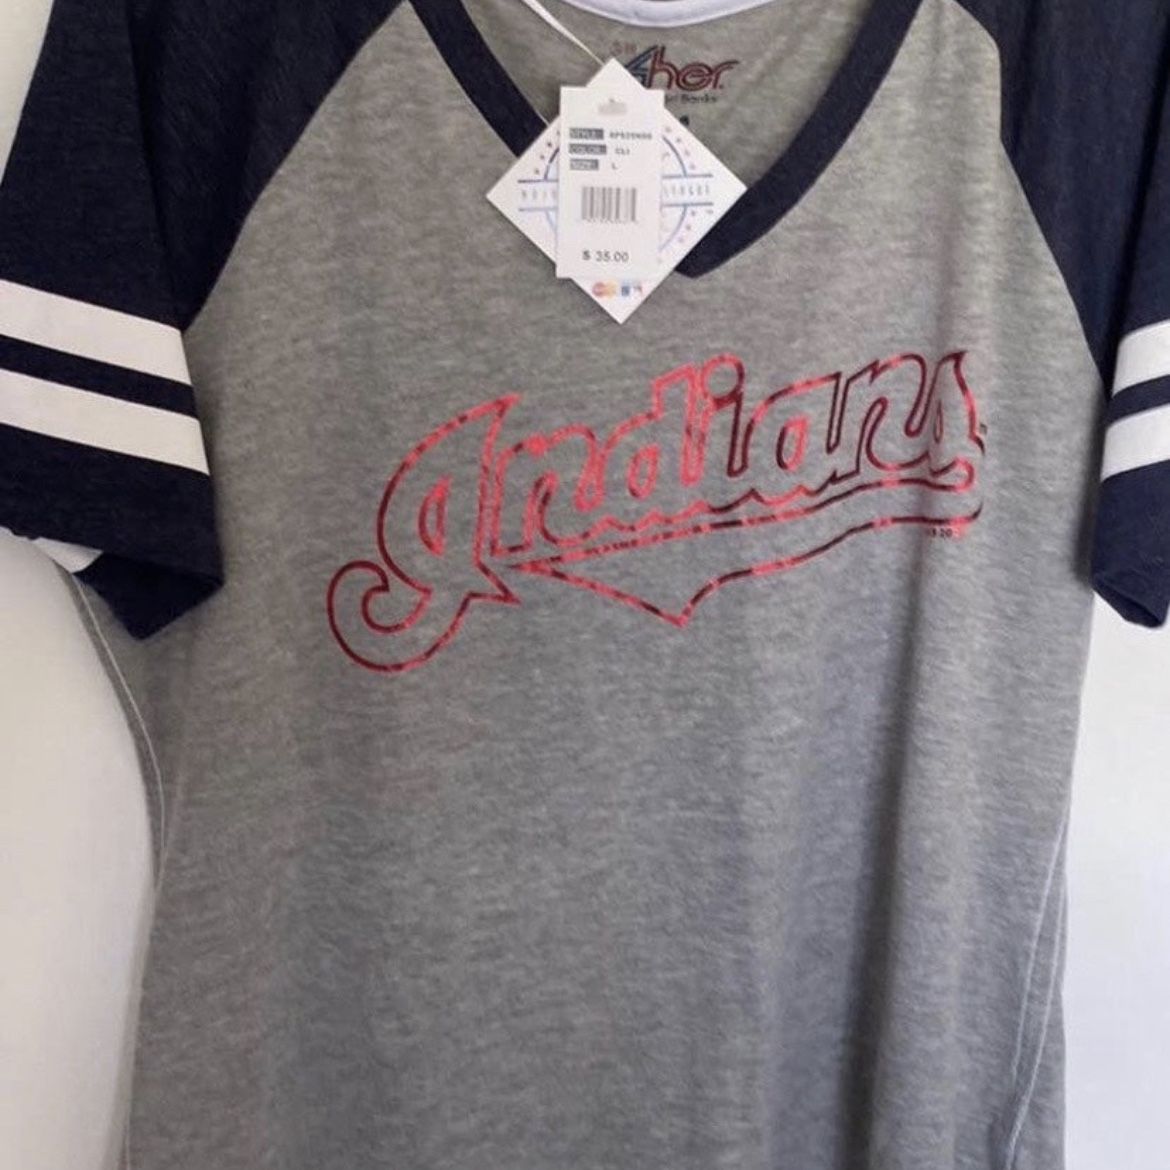 Cleveland Indians Baseball Jersey for Sale in Obetz, OH - OfferUp